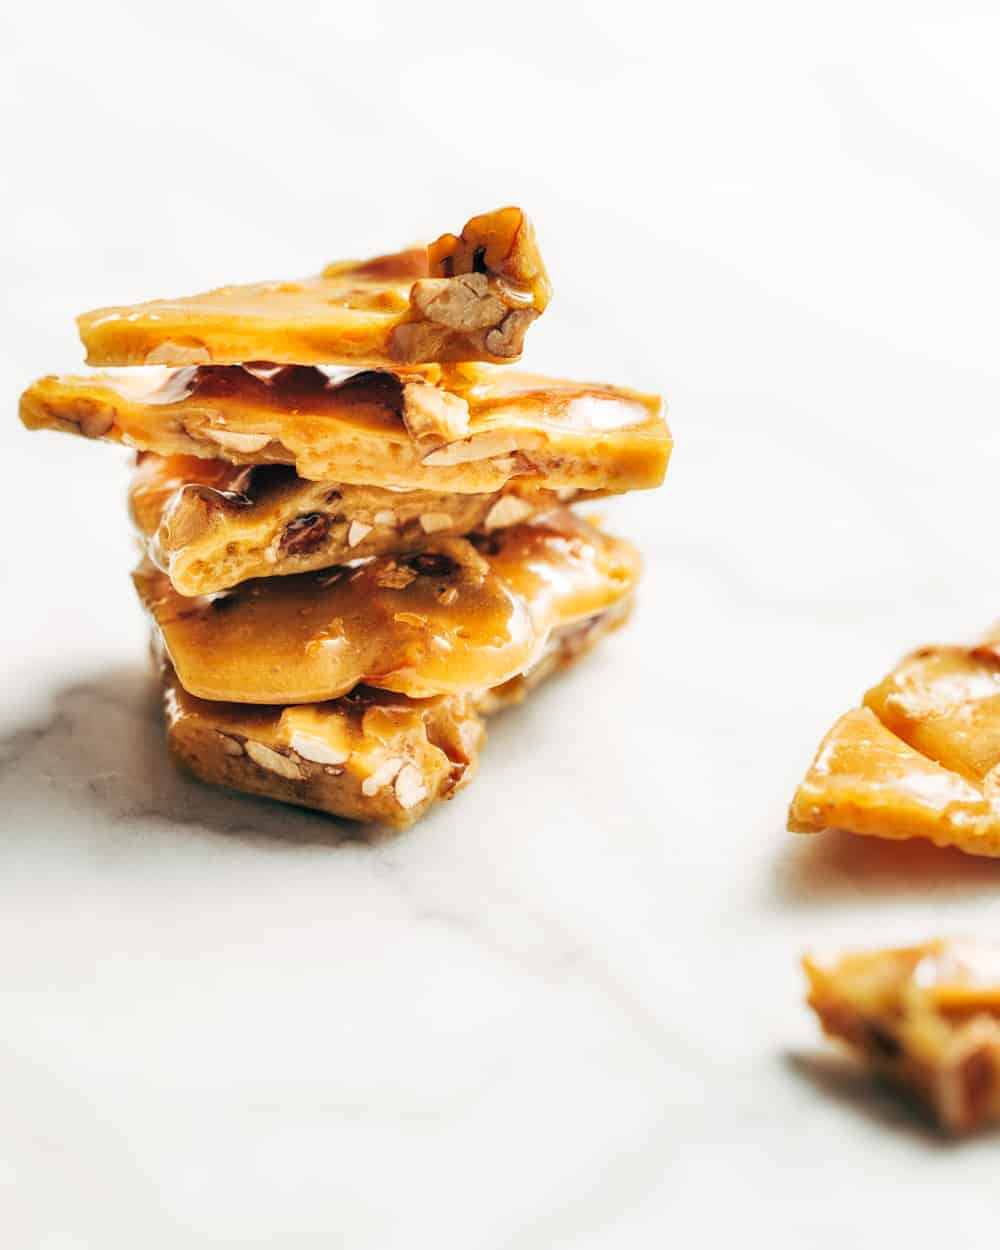 Nut Brittle is rich and buttery - a great holiday hostess gift!